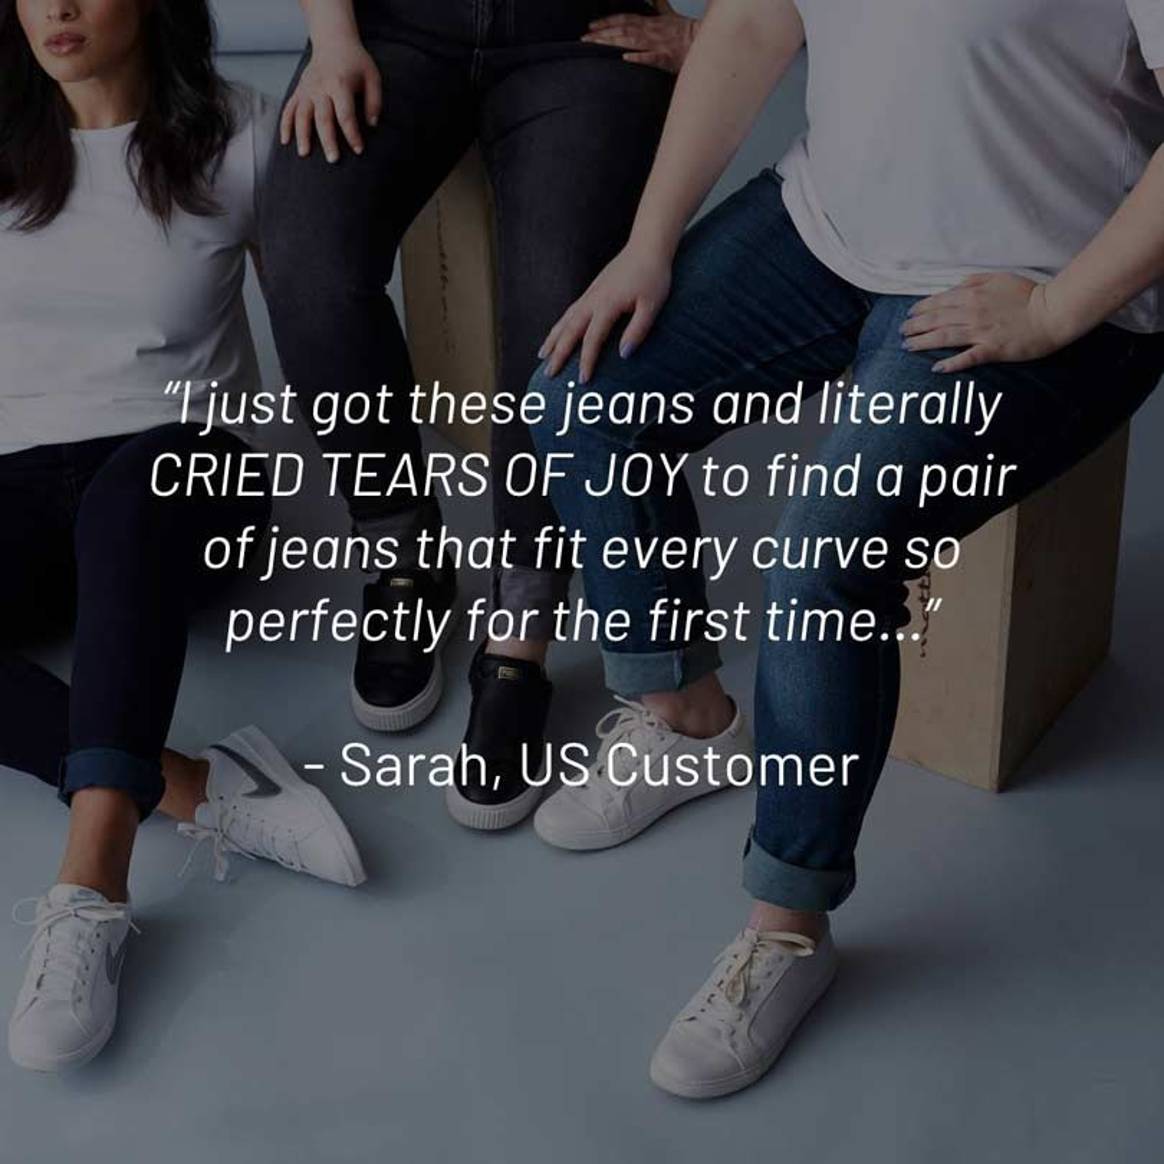 Startups that aim to change the way people buy clothes: Universal Standard